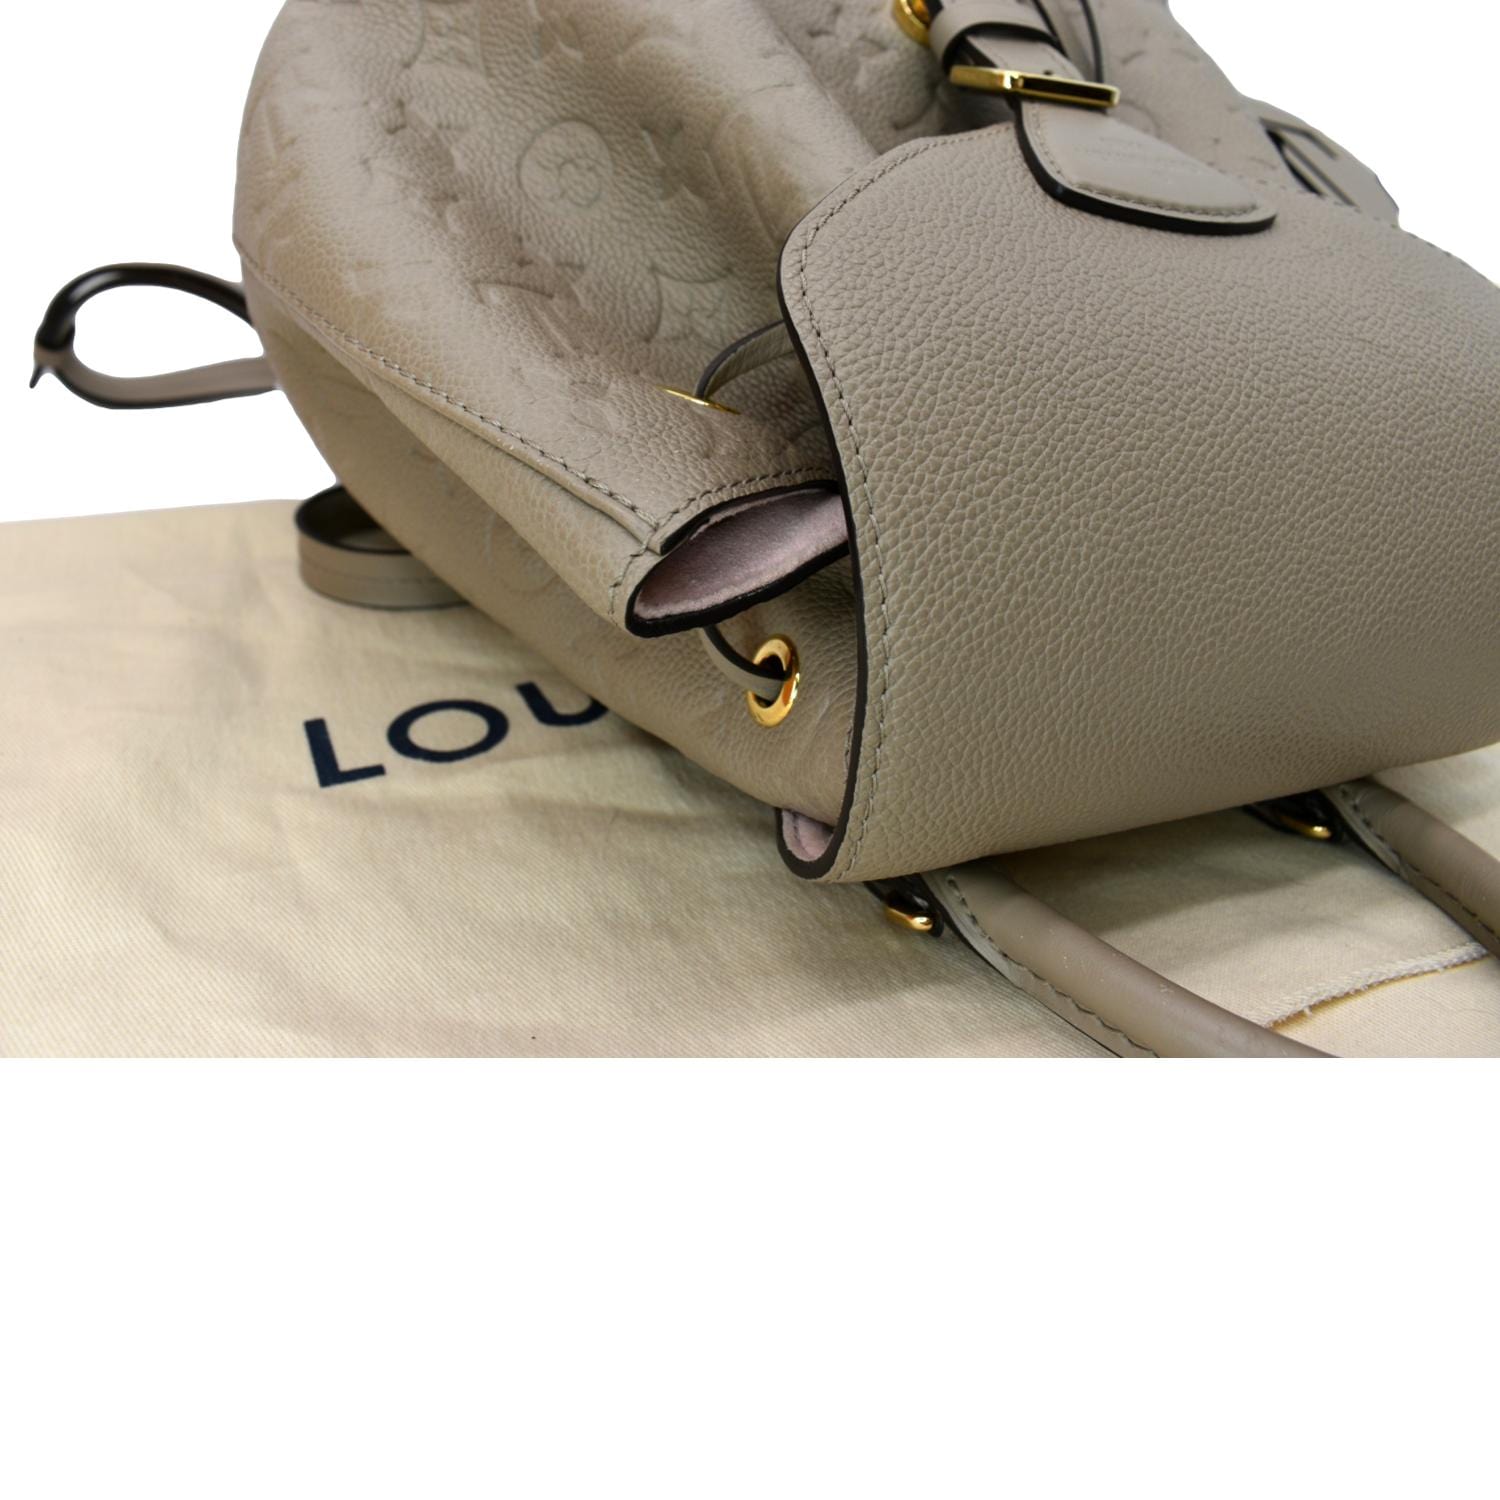 Montsouris cloth backpack Louis Vuitton Beige in Cloth - 32489642